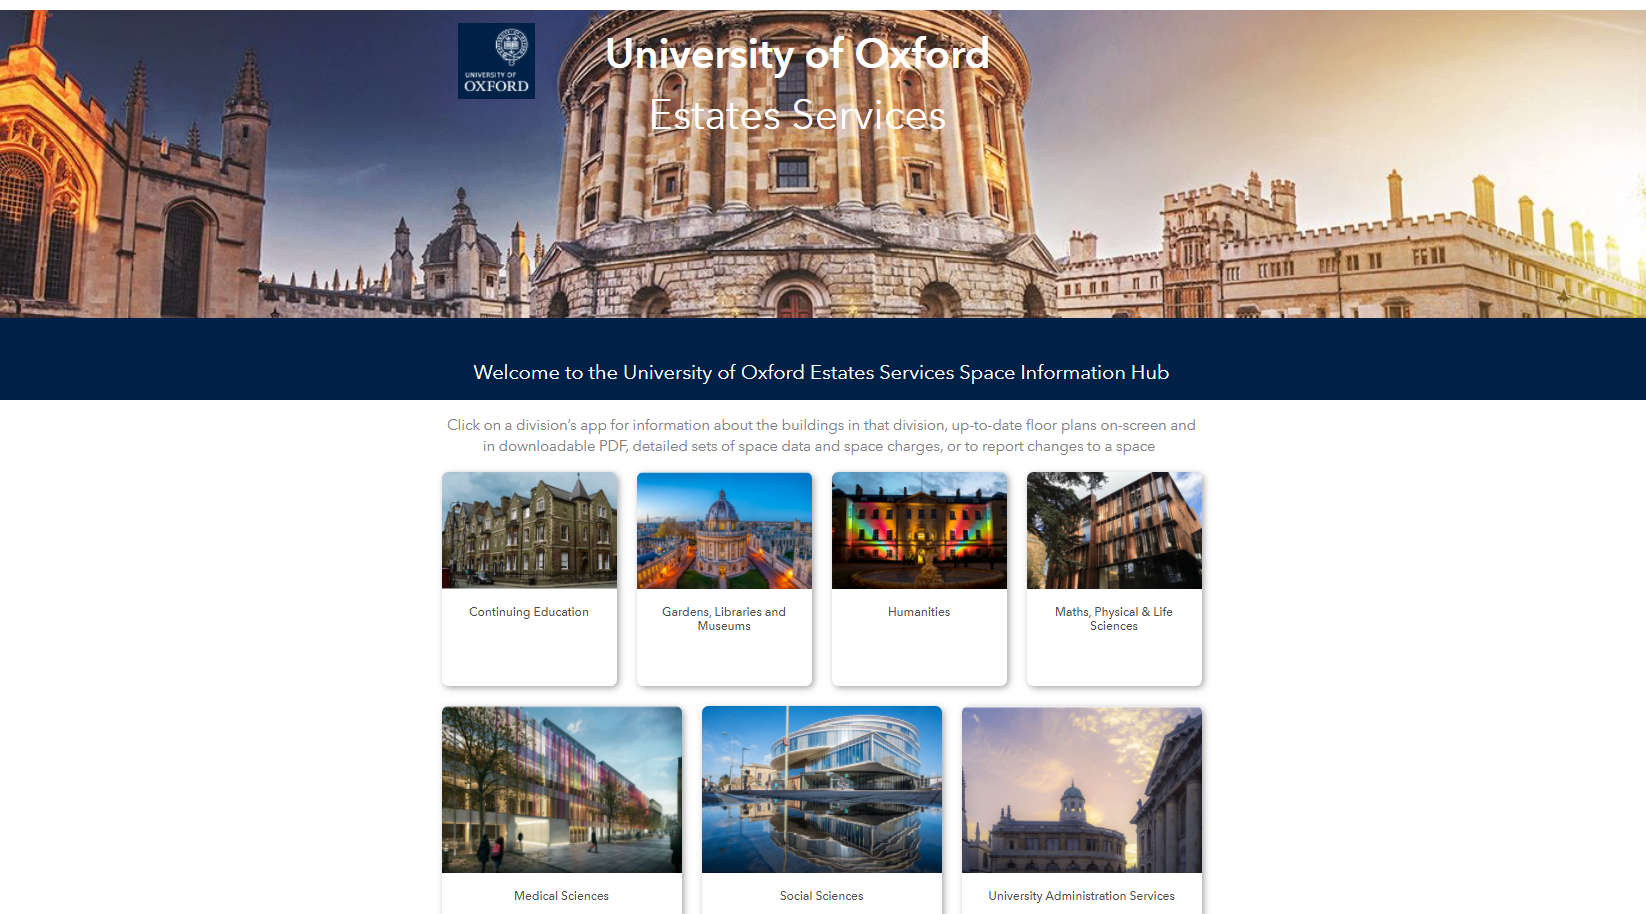 Screenshot of the University of Oxford Estates Services Space Information Hub website with central image of the Radcliffe Camera and links to all University divisions